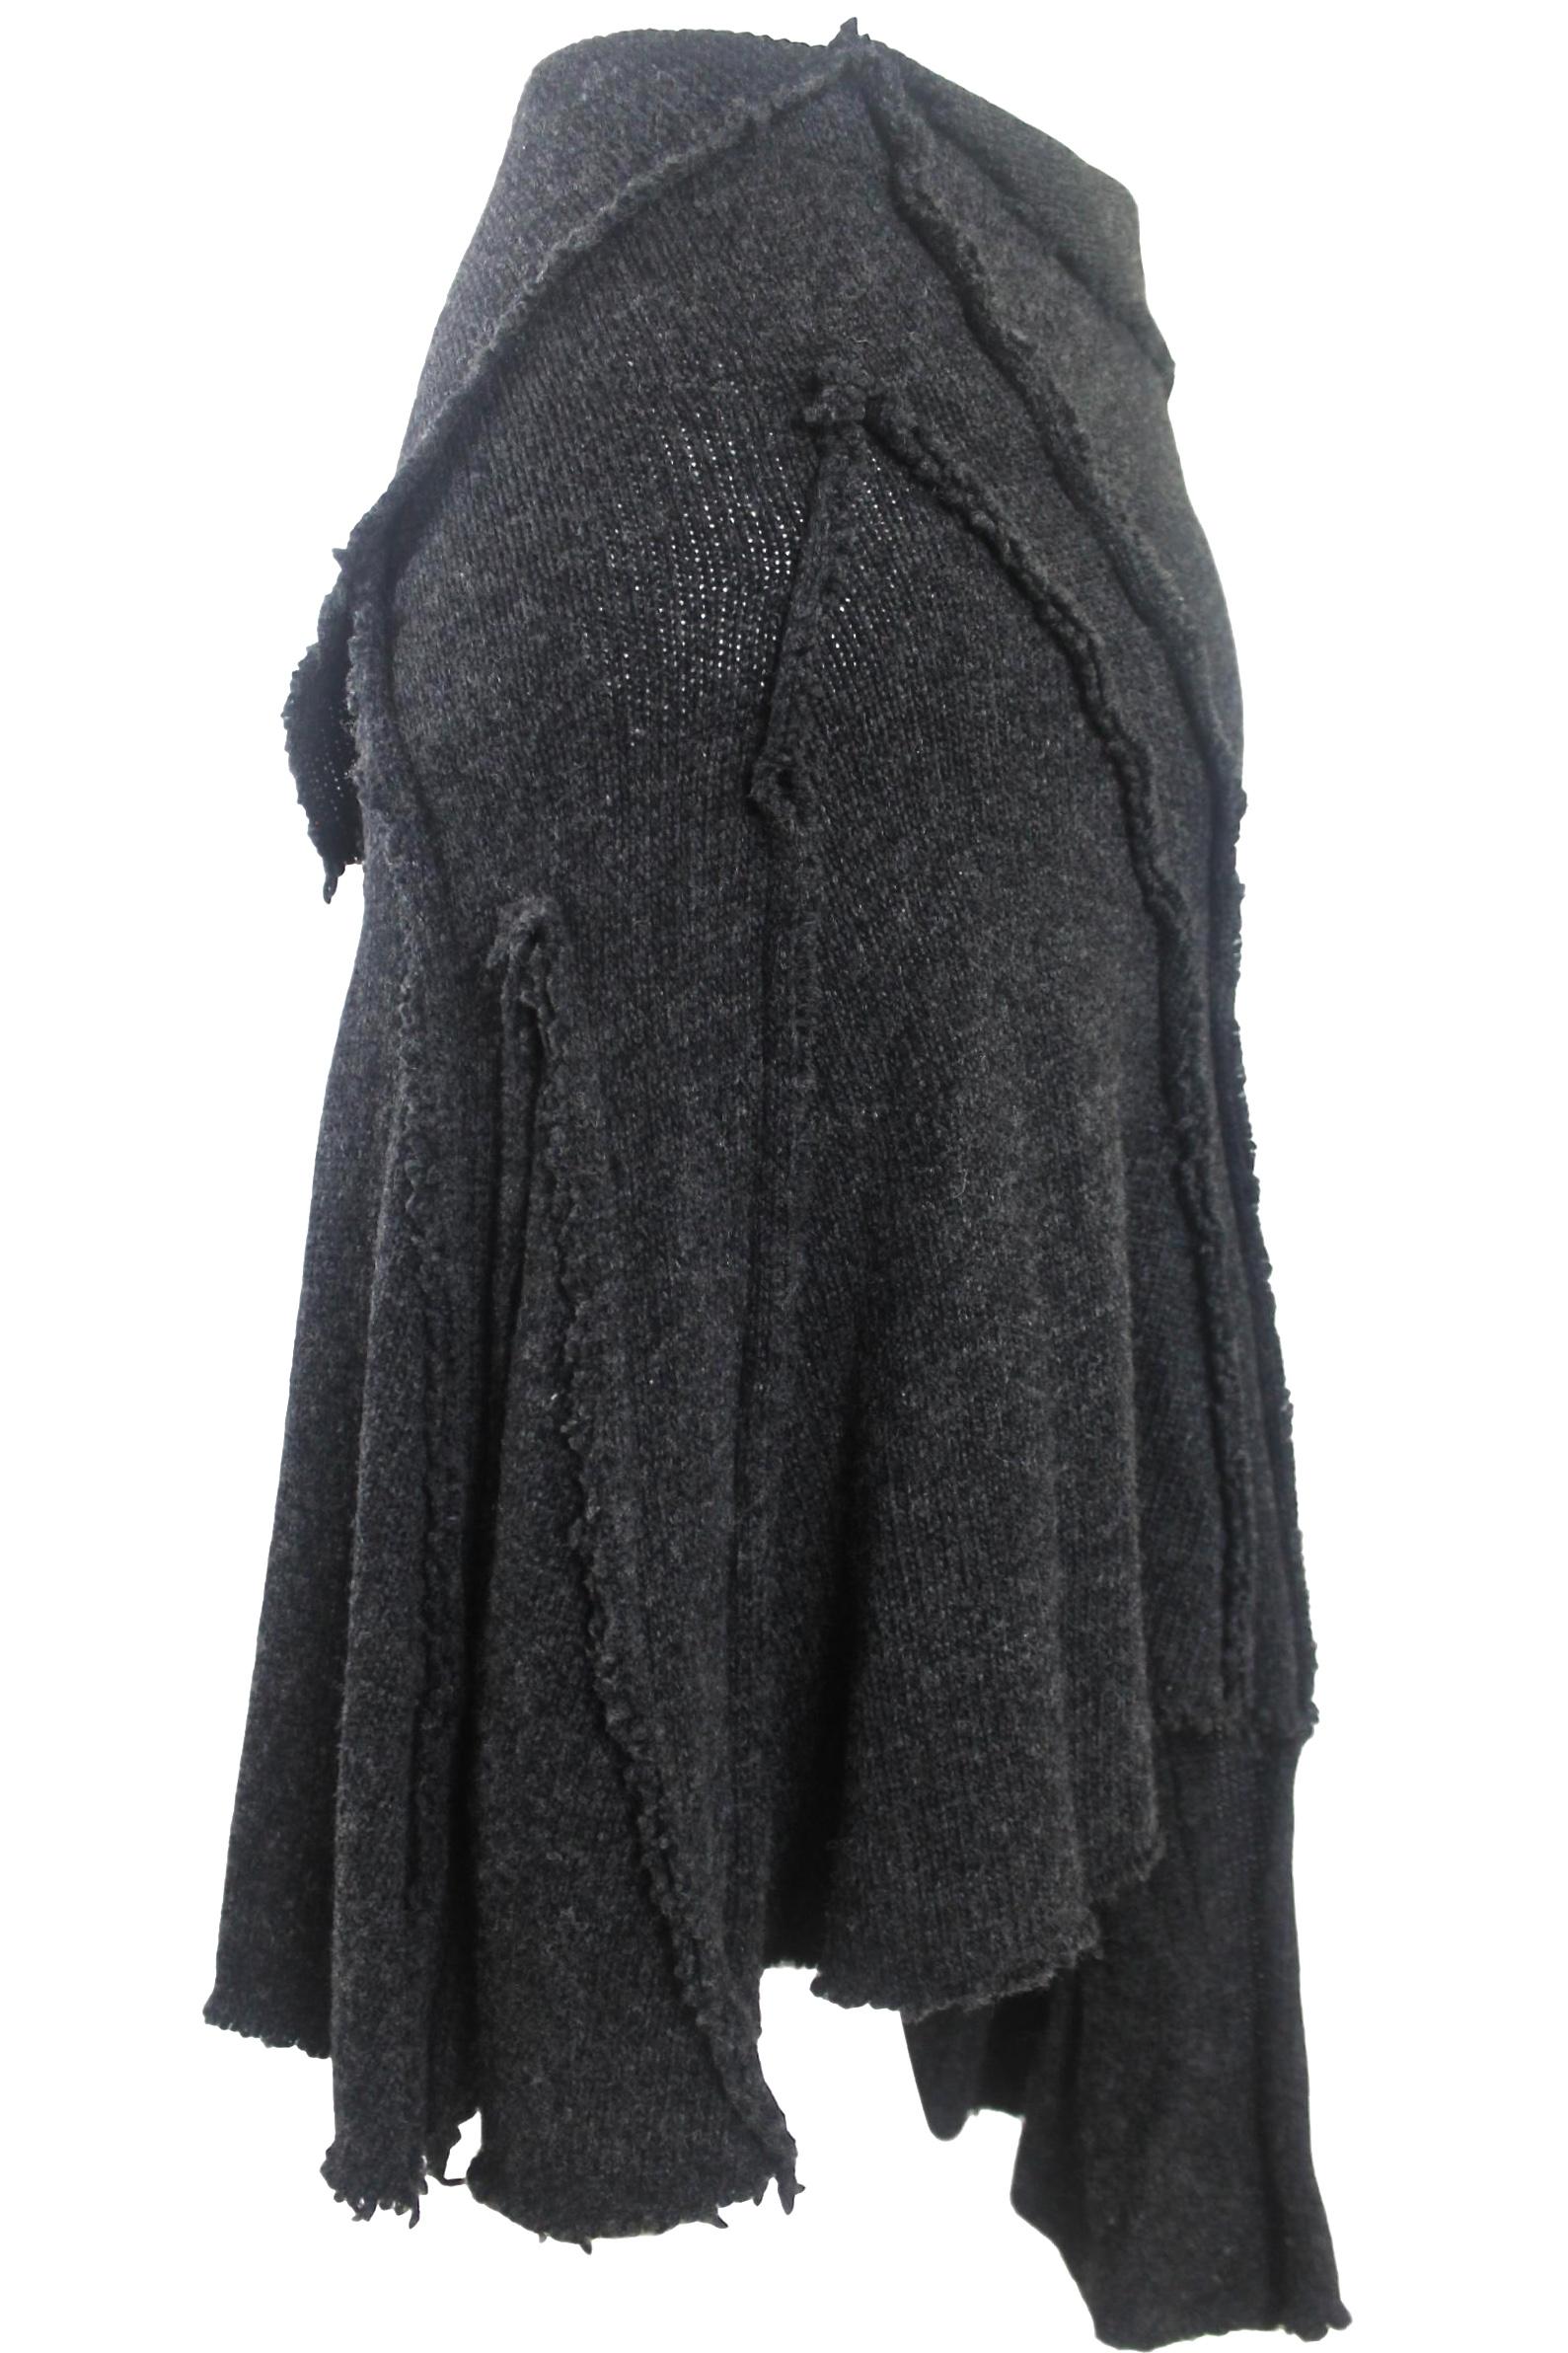 Come des Garcons 2002 Collection Wool Knit Skirt In Good Condition For Sale In Bath, GB